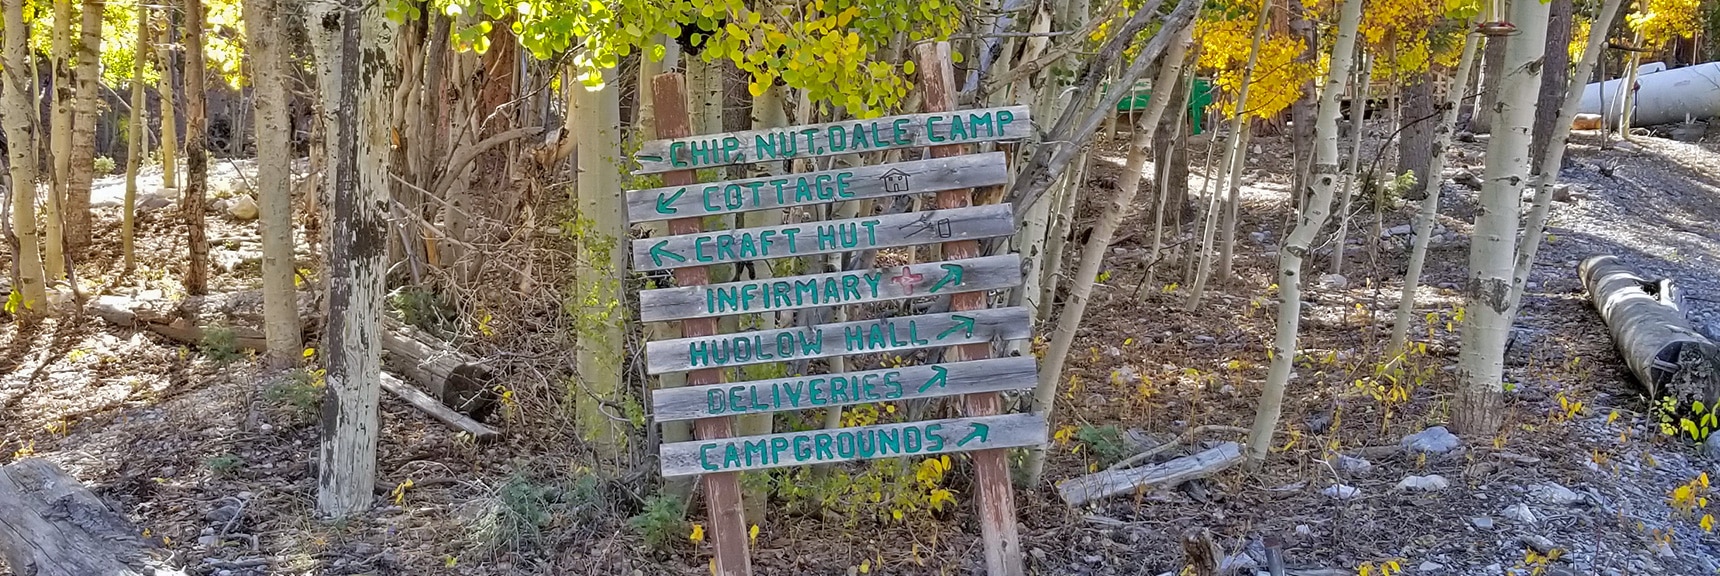 Camp Foxtail Girl Scouts Camp Directional Signs | Foxtail Canyon | Foxtail Girl Scouts Camp | Mt Charleston Wilderness | Spring Mountains, Nevada